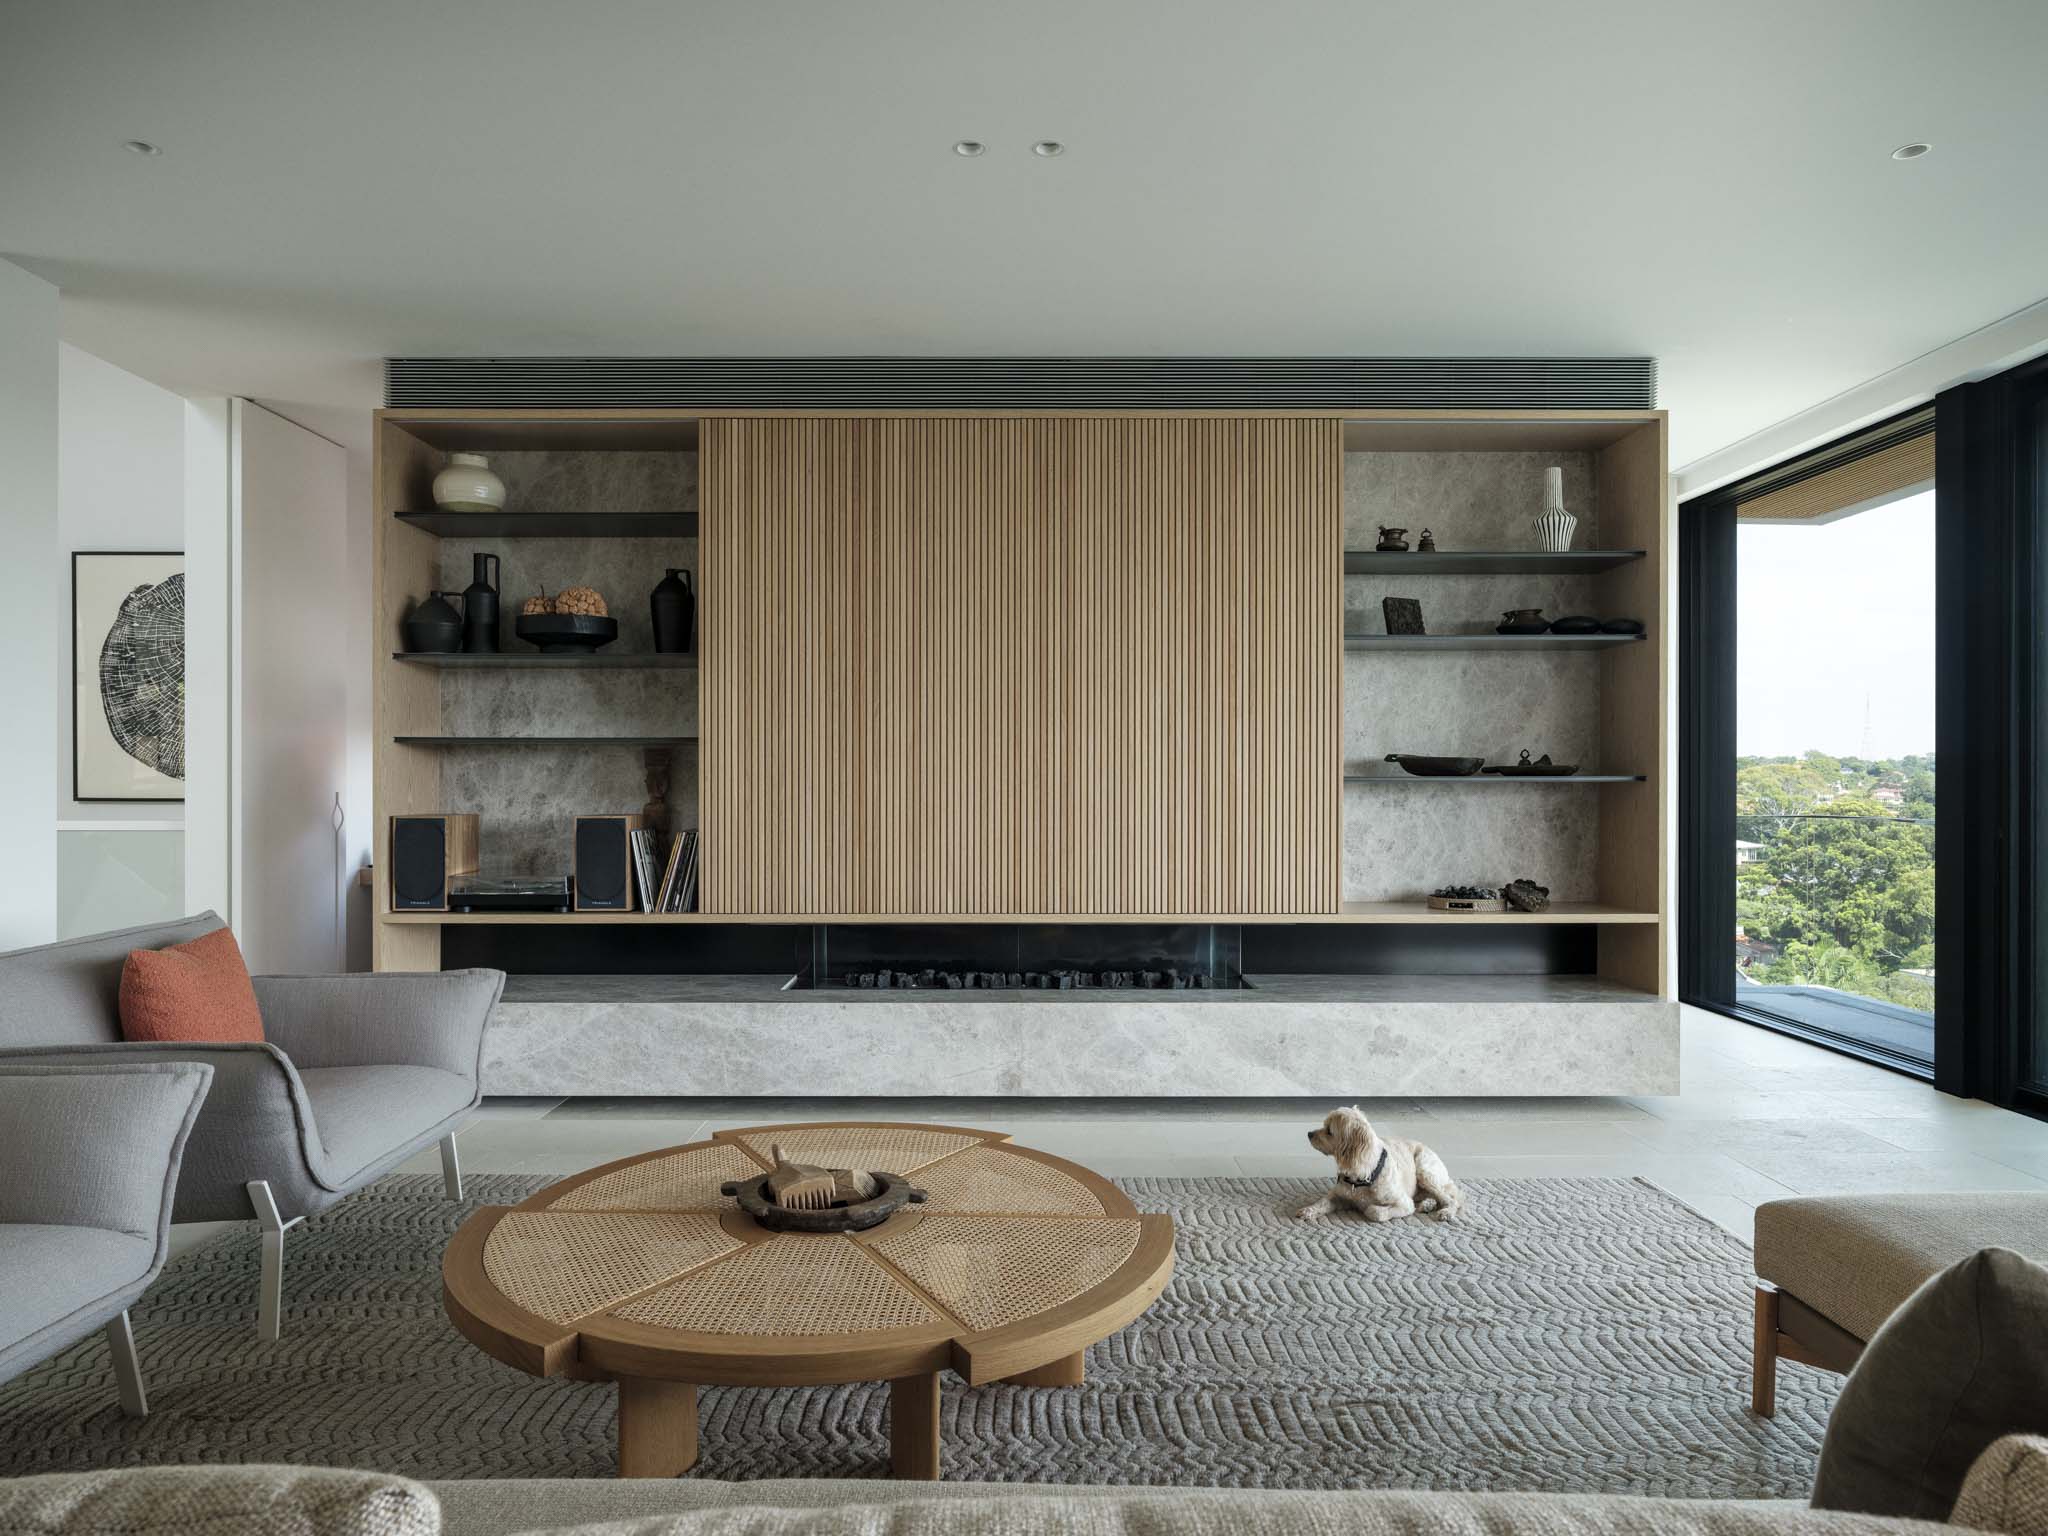 Northbridge by Corben Architects showing living room interior